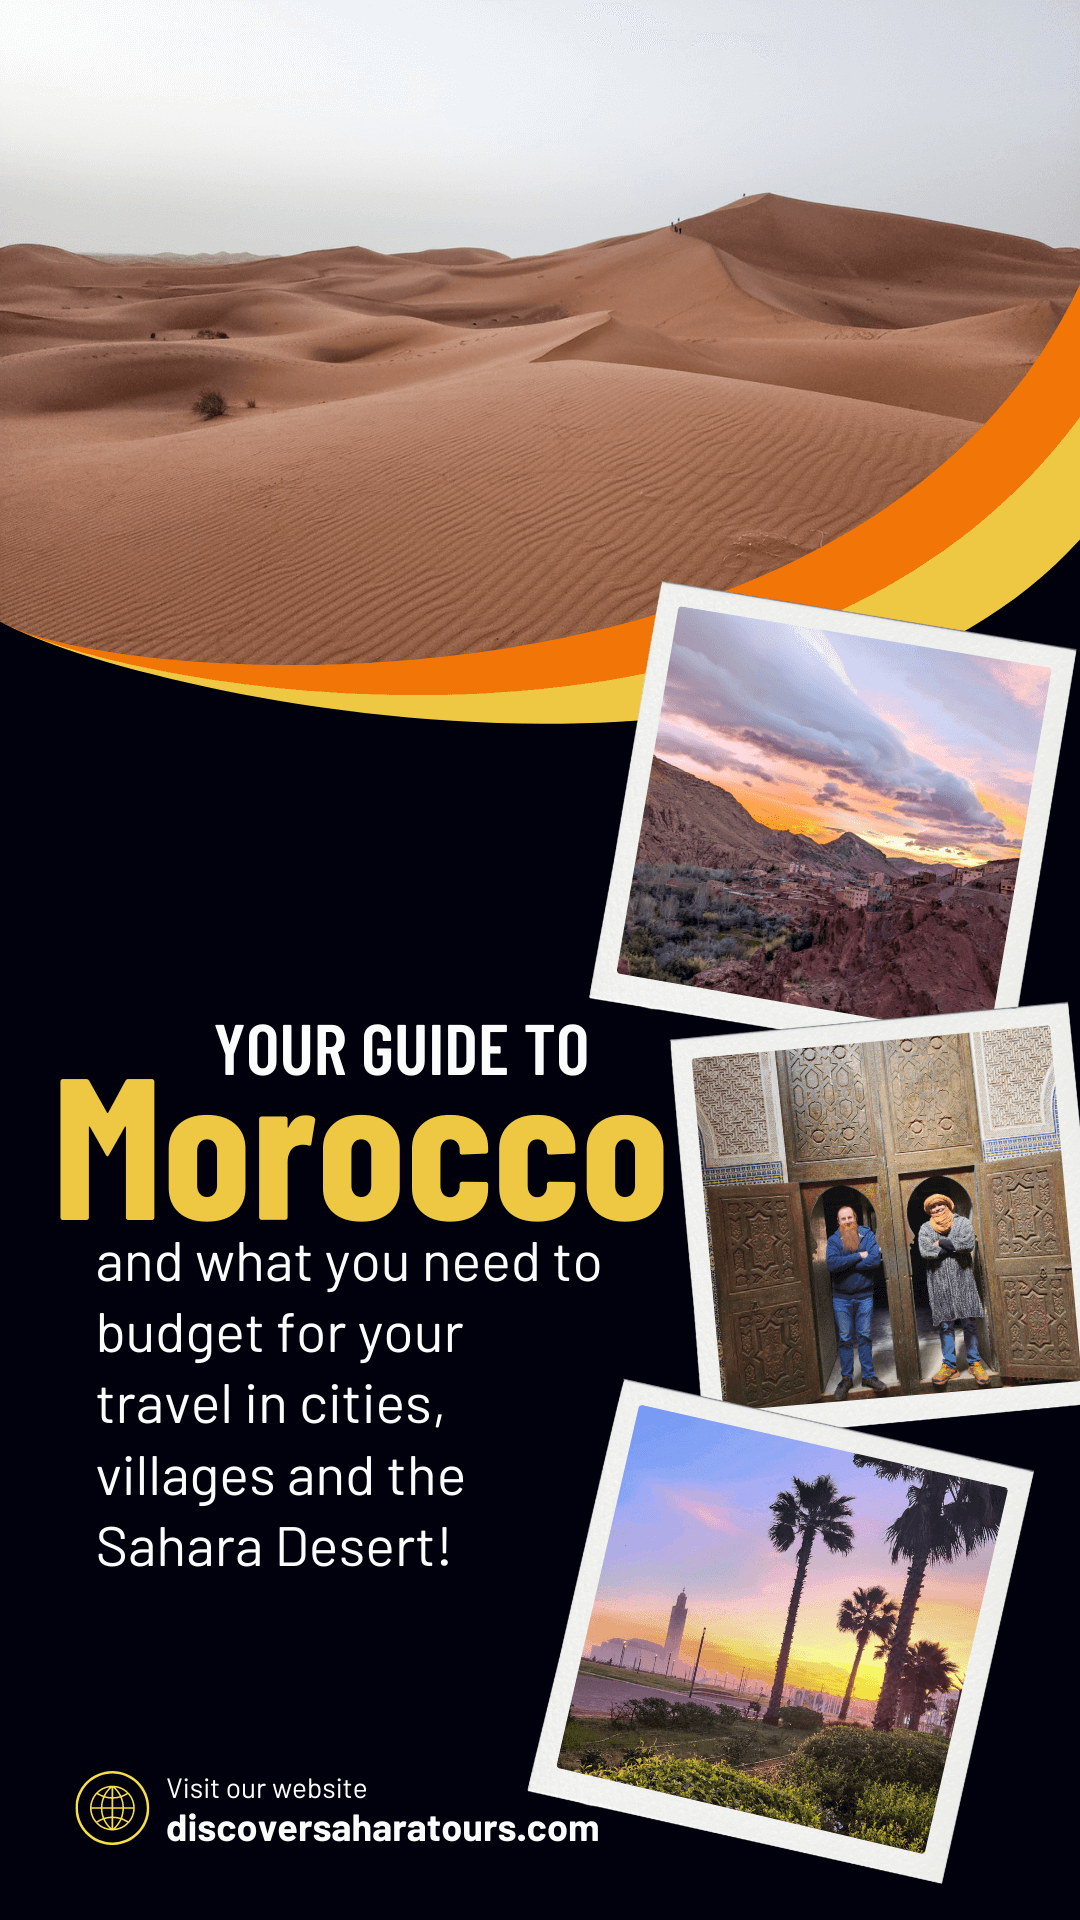 Your Guide to Morocco and what you should budget for your travel